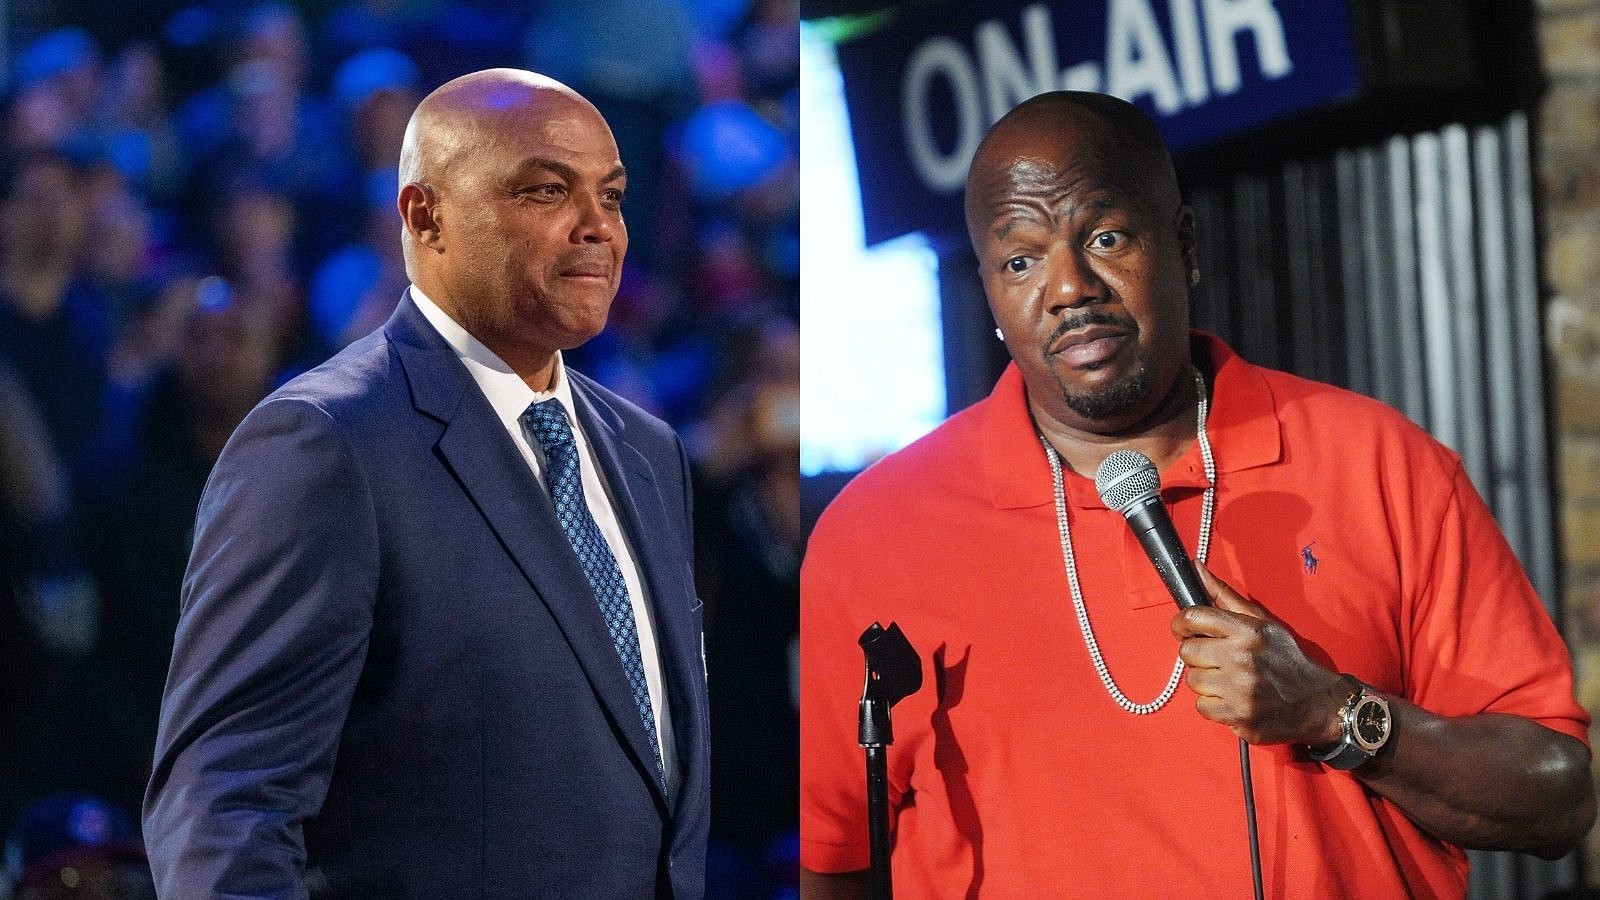 ‘Charles Barkley lost  million in two nights, at a roulette table’: Earthquake comedian tells story of Chuck’s misery in Vegas